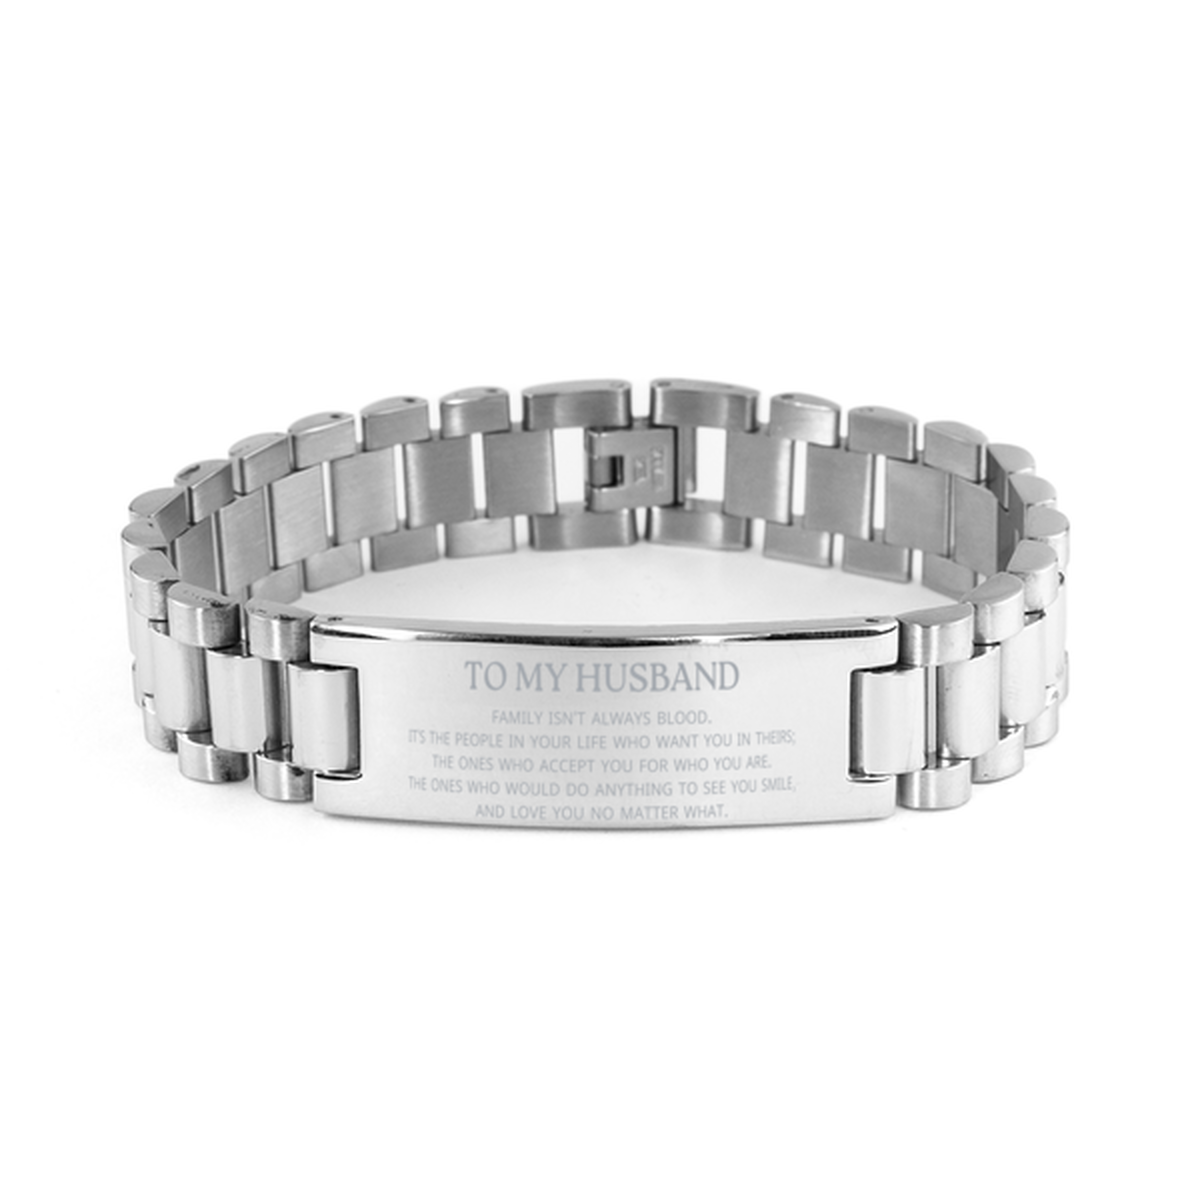 To My Husband Gifts, Family isn't always blood, Husband Ladder Stainless Steel Bracelet, Birthday Christmas Unique Present For Husband